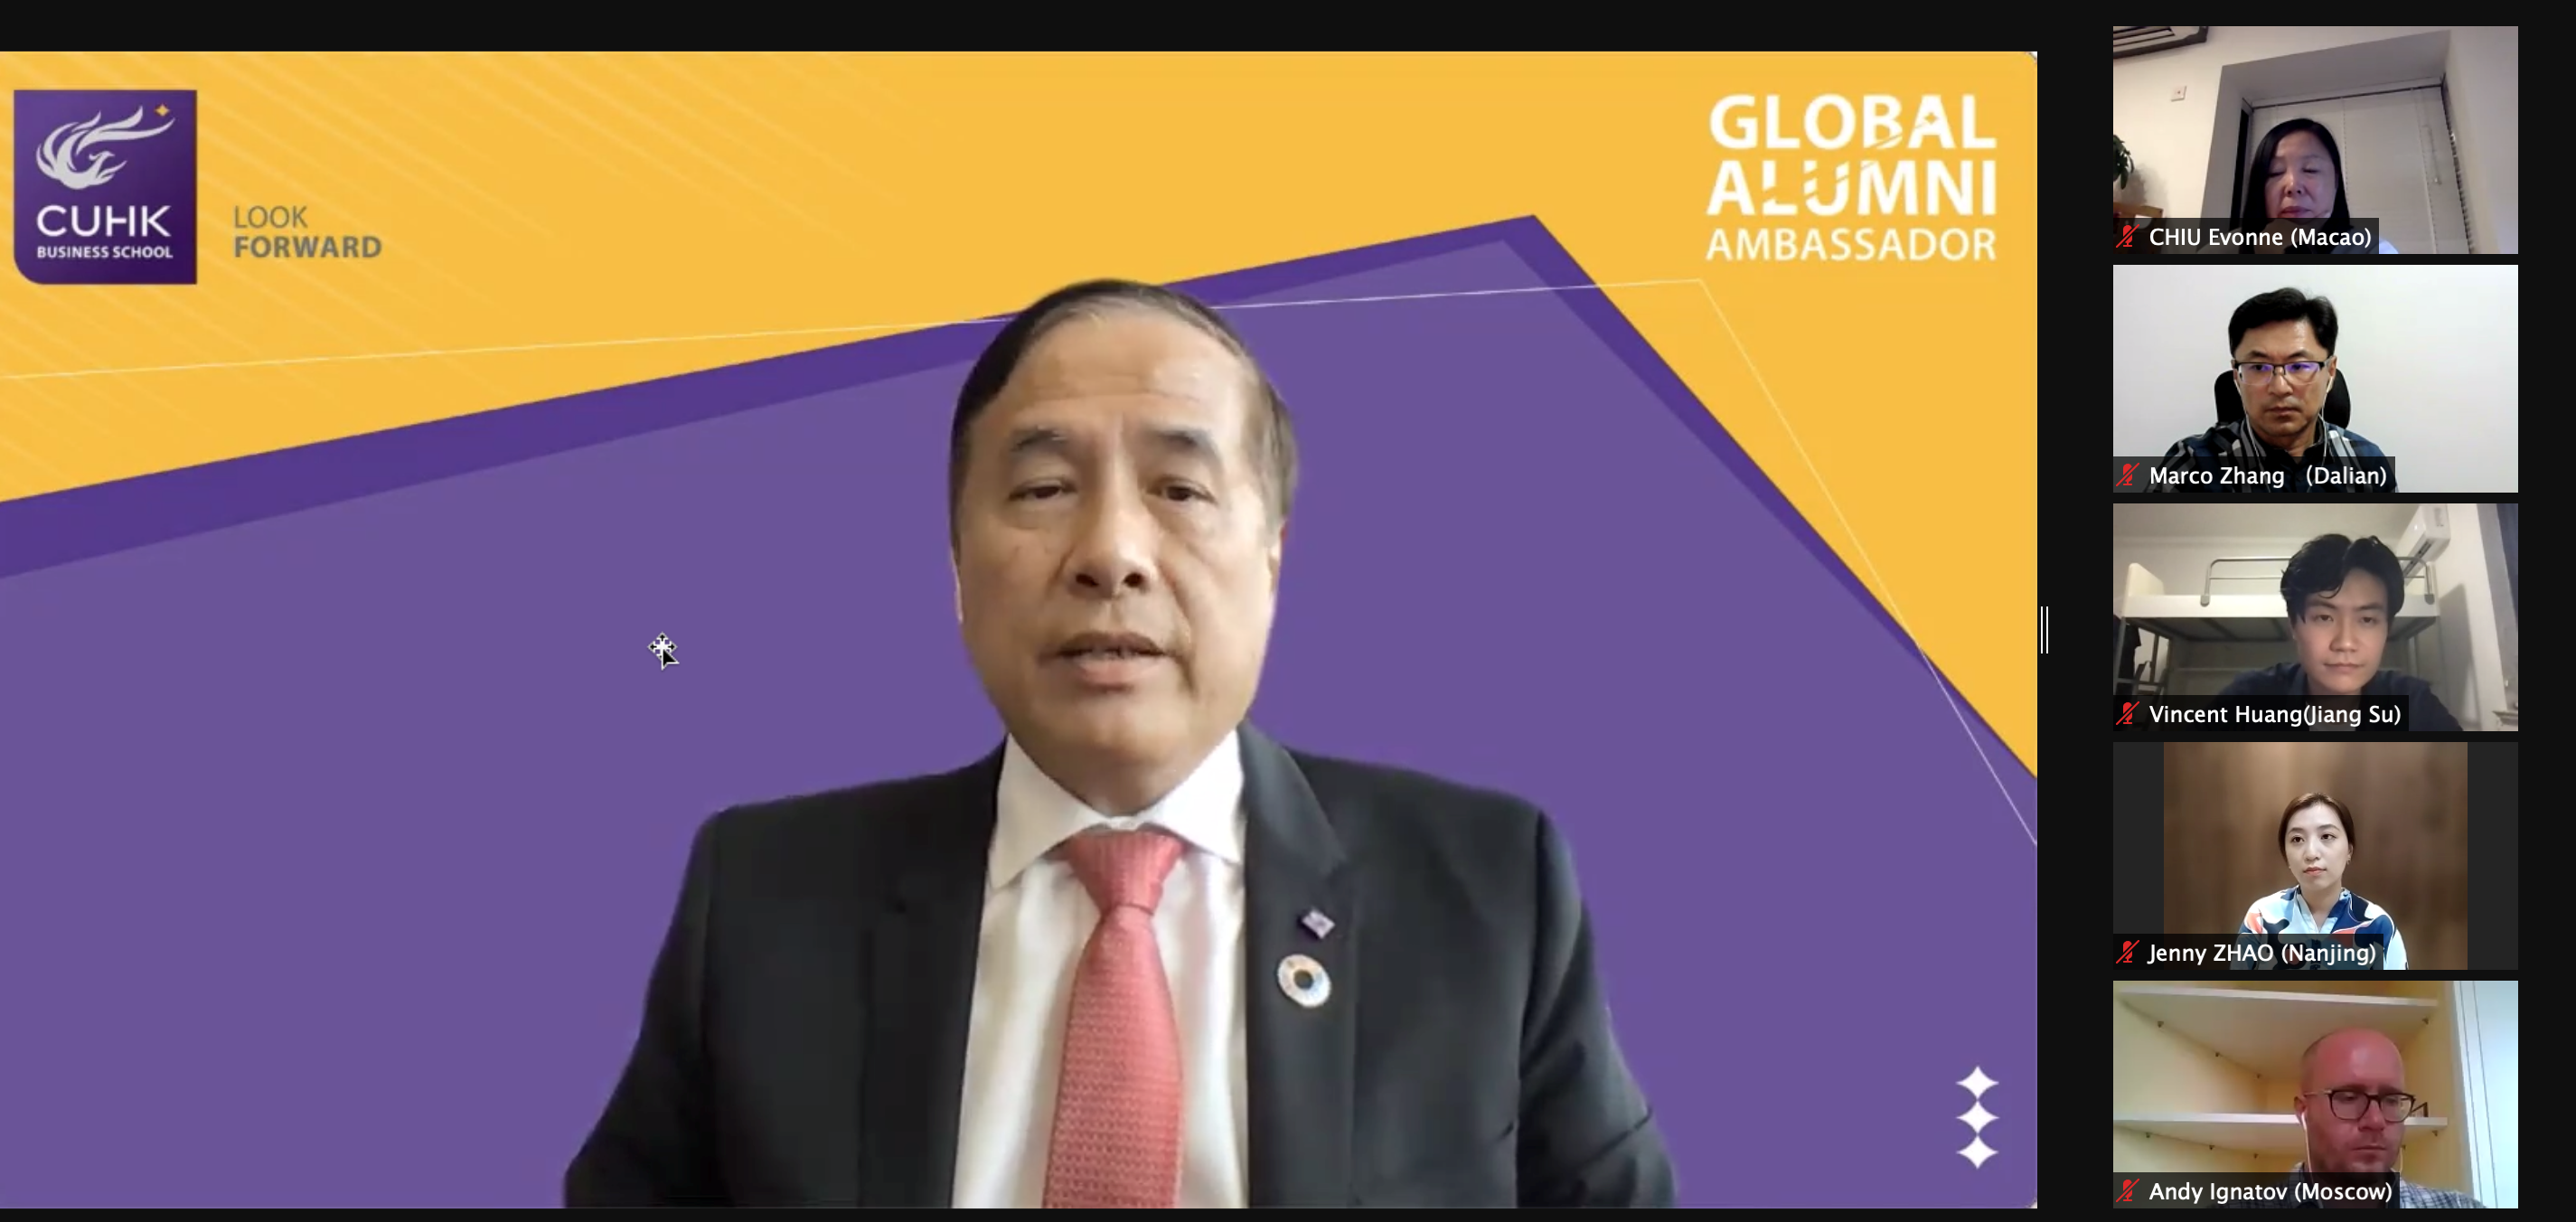 Professor Lin ZHOU encouraged the Global Alumni Ambassadors to work shoulder-to-shoulder with the CUHK Business School to drive the alumni community further during his opening remarks.